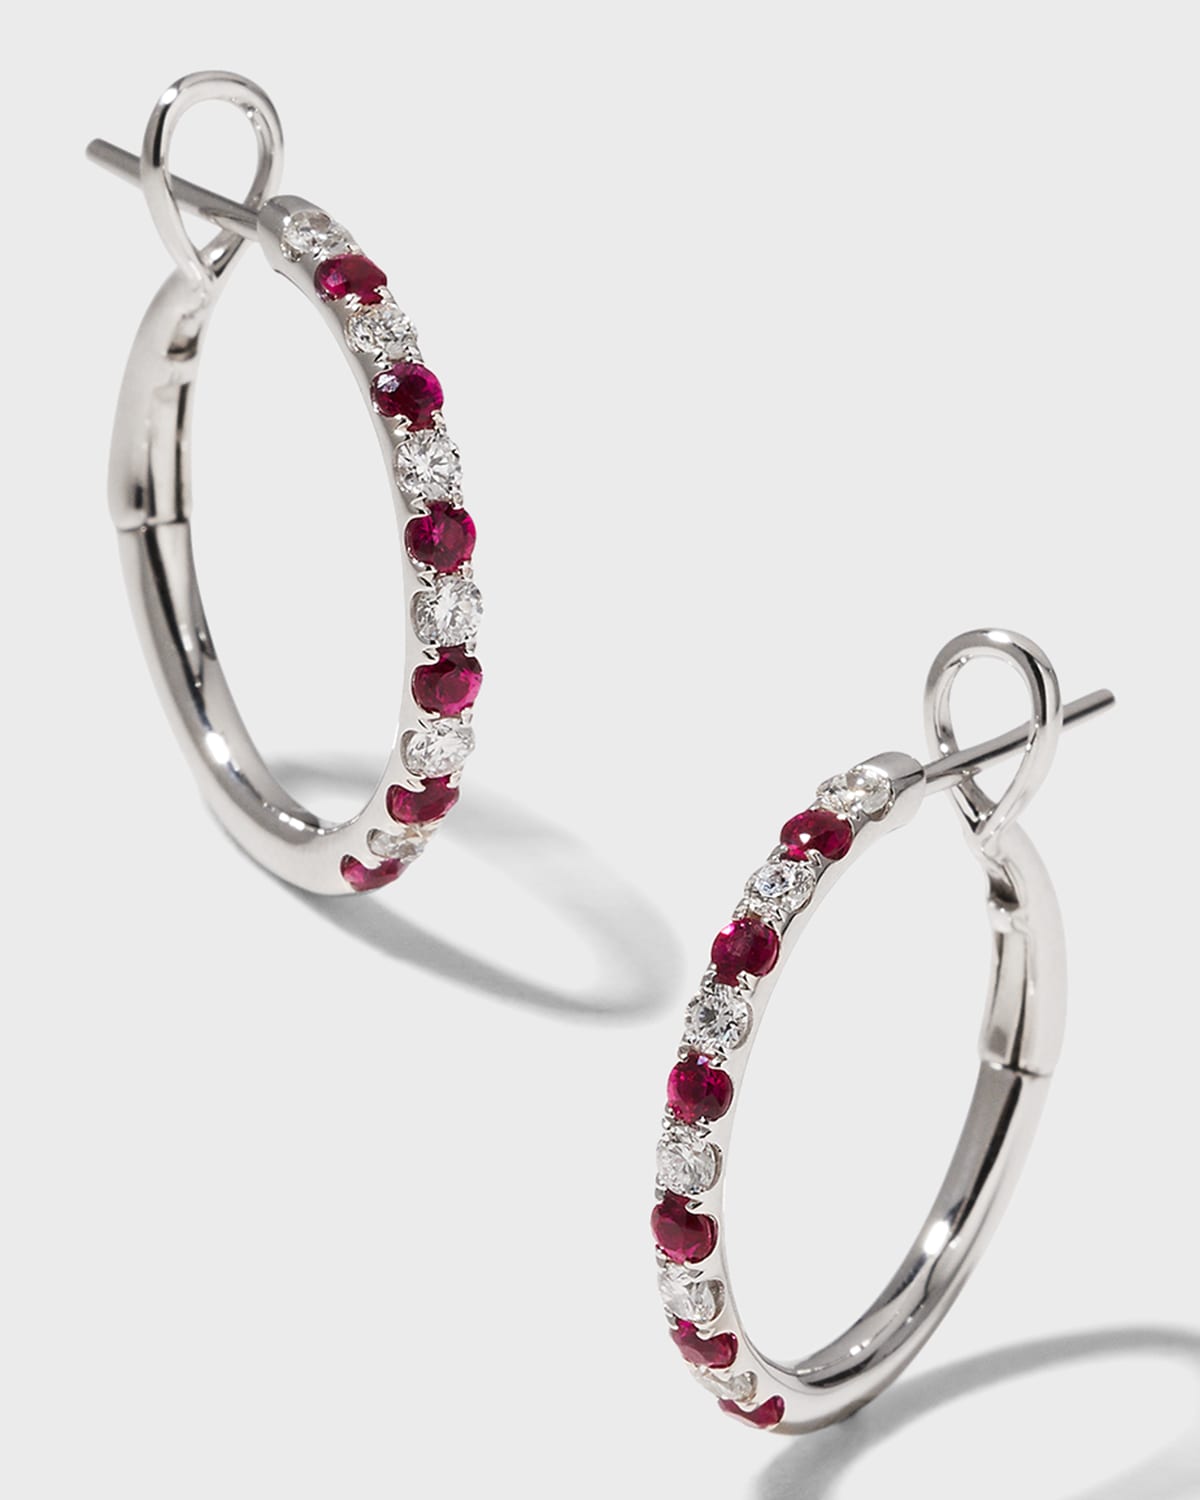 Frederic Sage 18k White Gold Medium Diamond And Ruby Hoop Earrings In Red